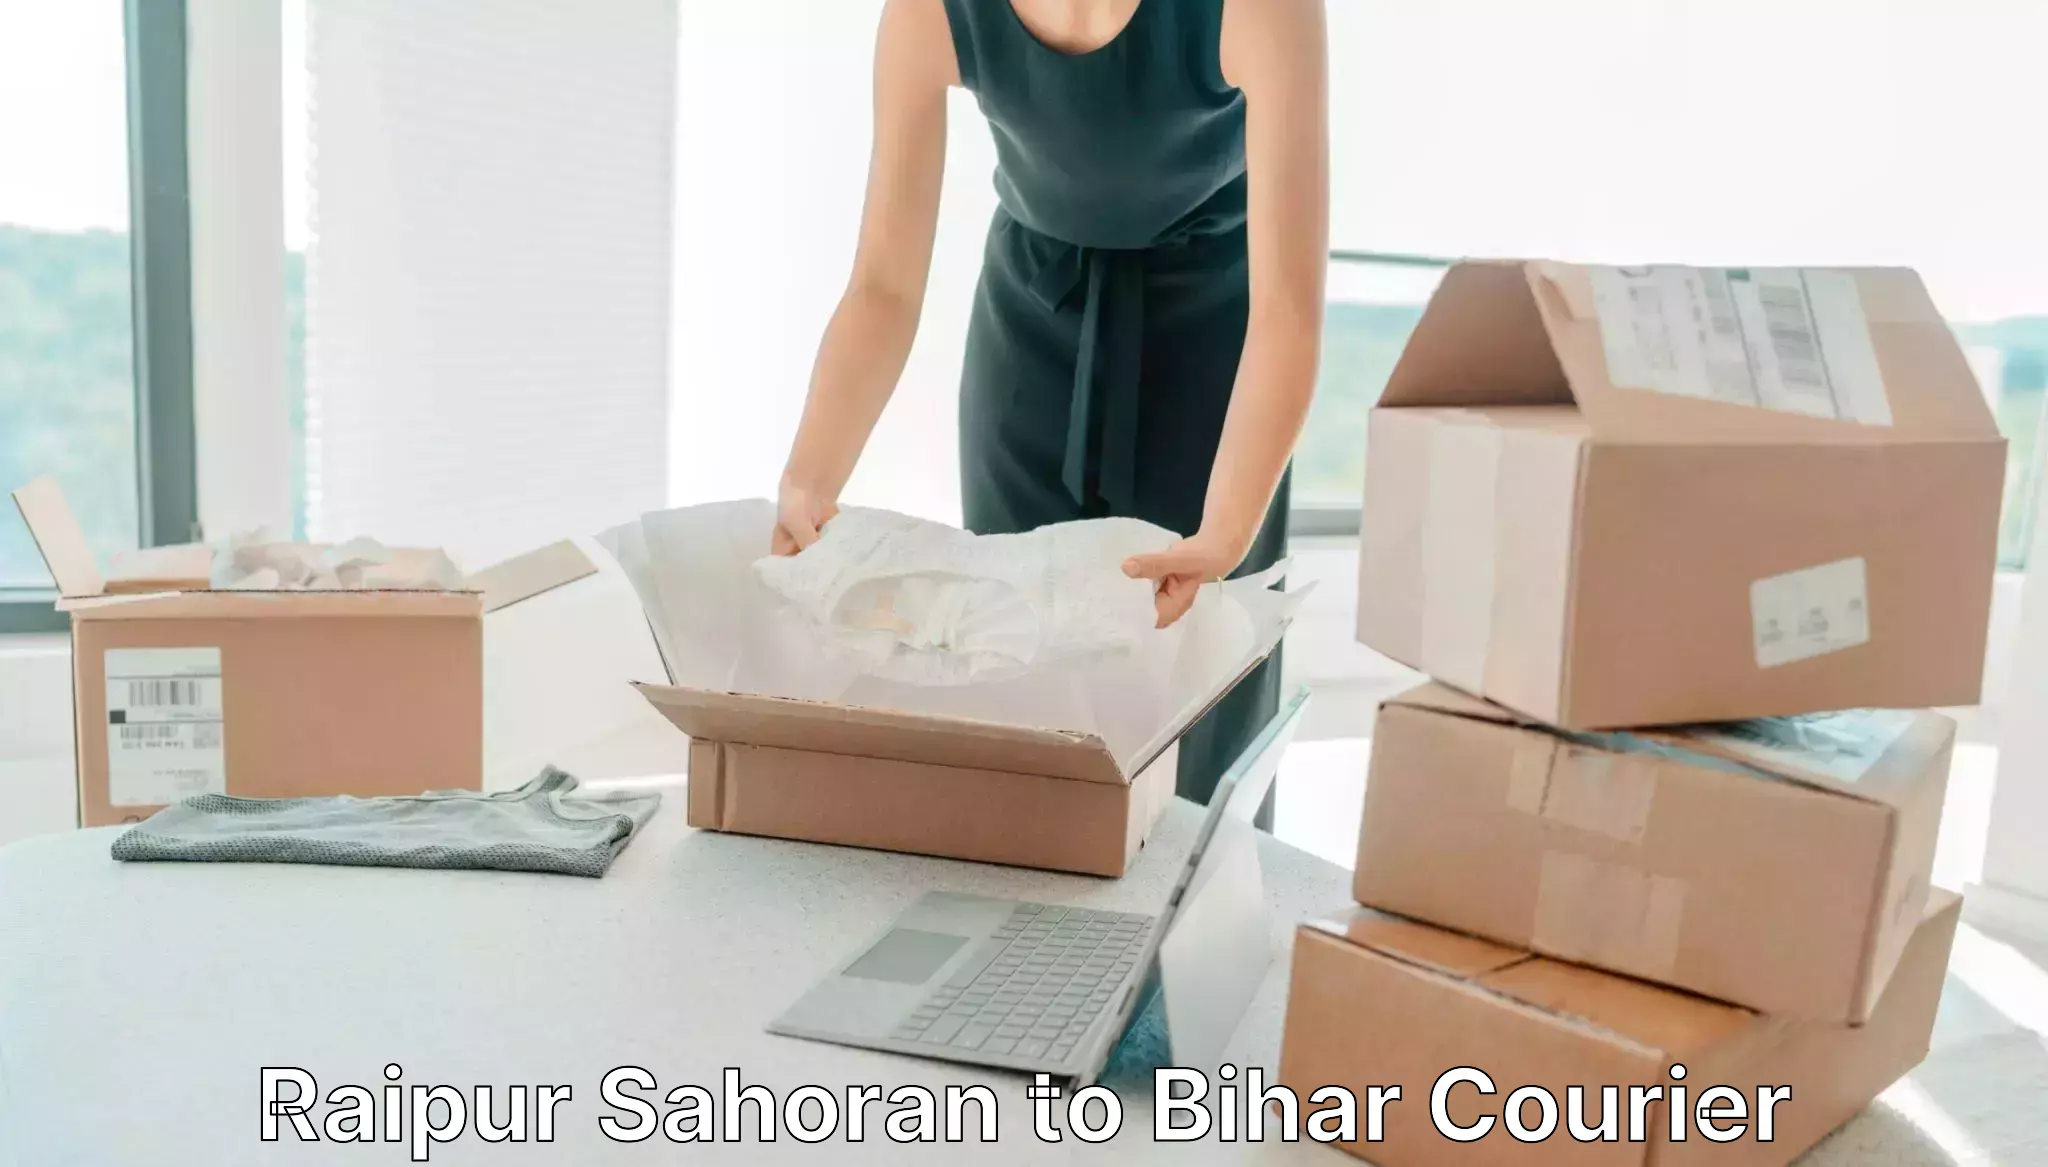 Overnight delivery services Raipur Sahoran to Jehanabad